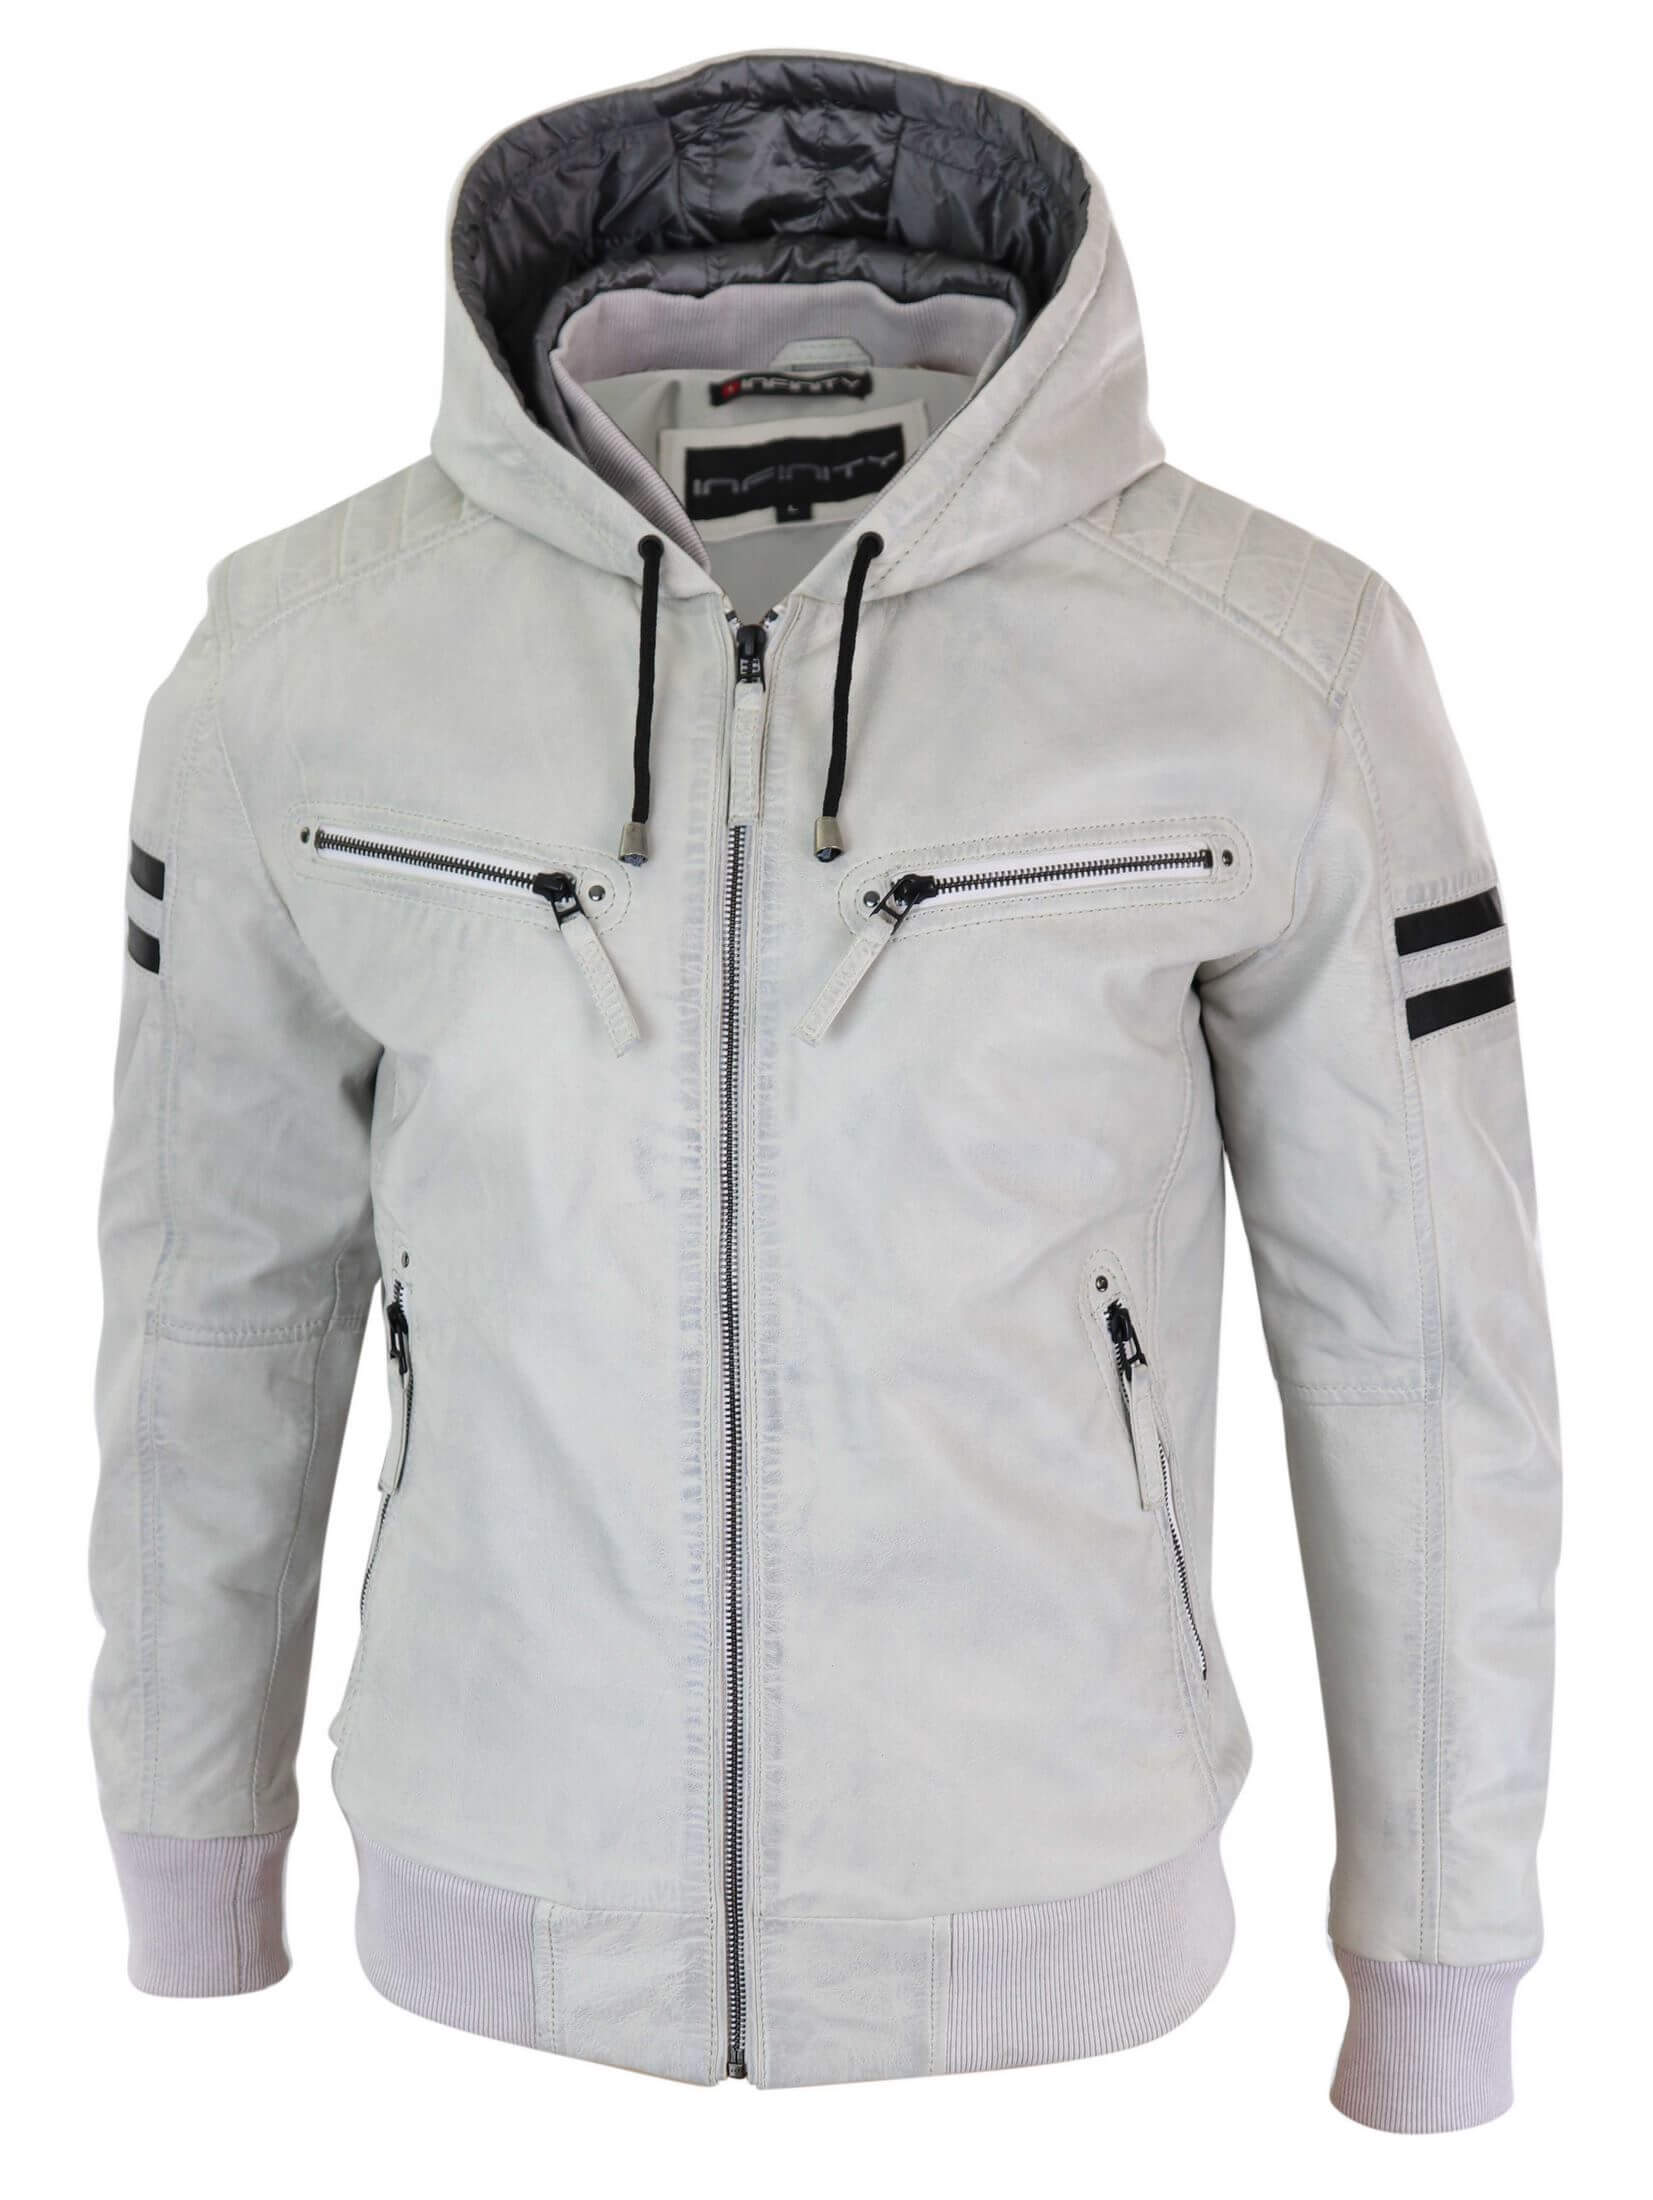 Men's Real Leather Bomber Jacket with Hood-White: Buy Online - Happy ...